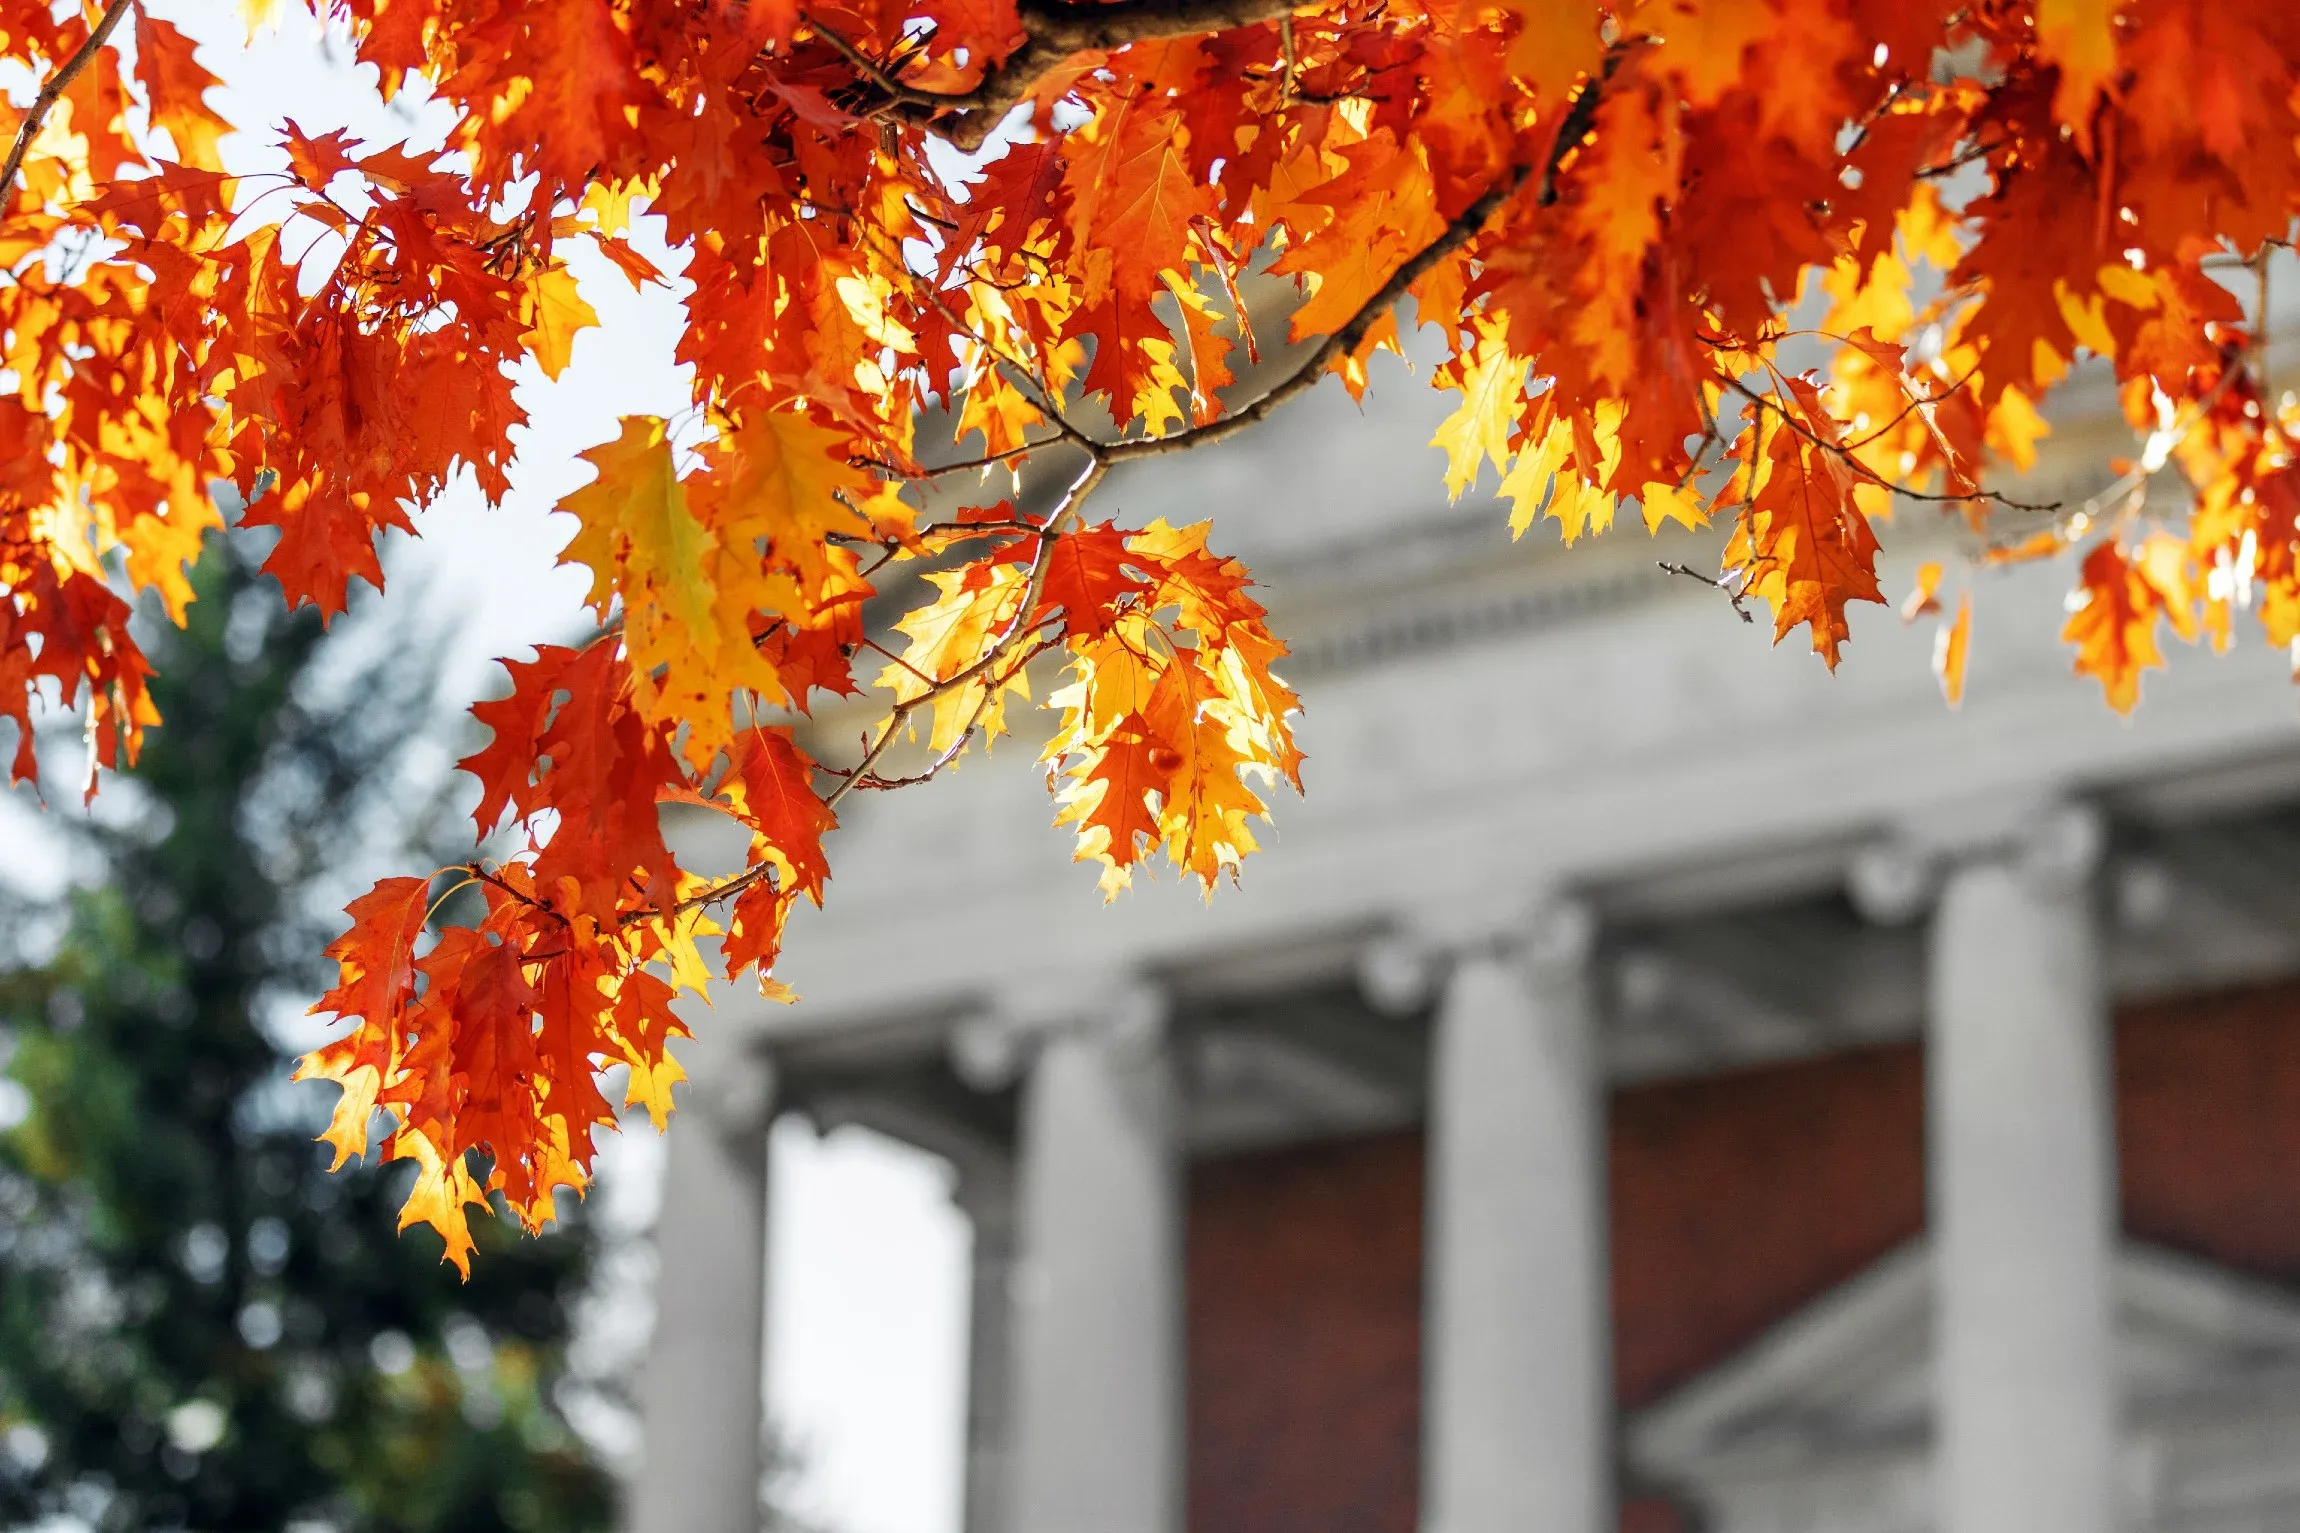 Orange fall leaves in front of campus building.